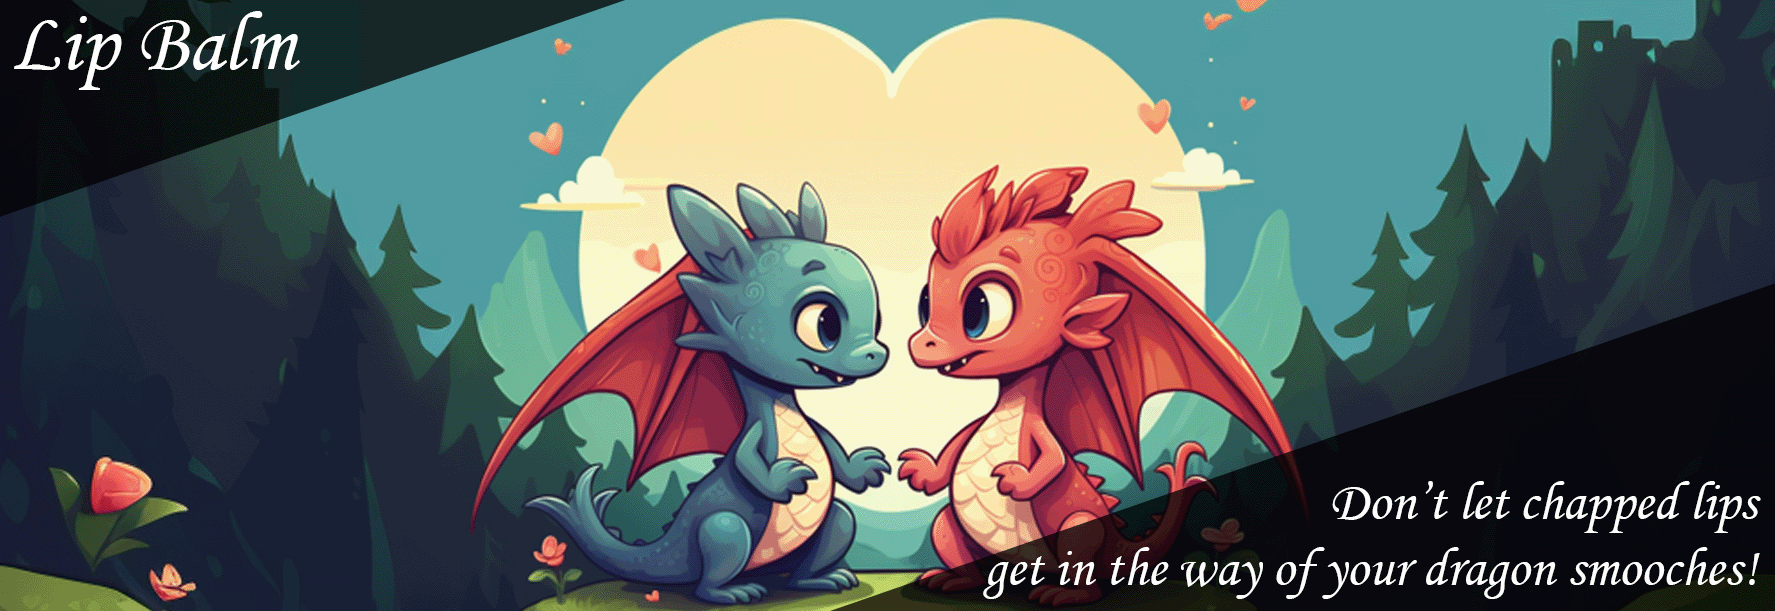 Lip Balm - Don’t let chapped lips get in the way of your dragon smooches!